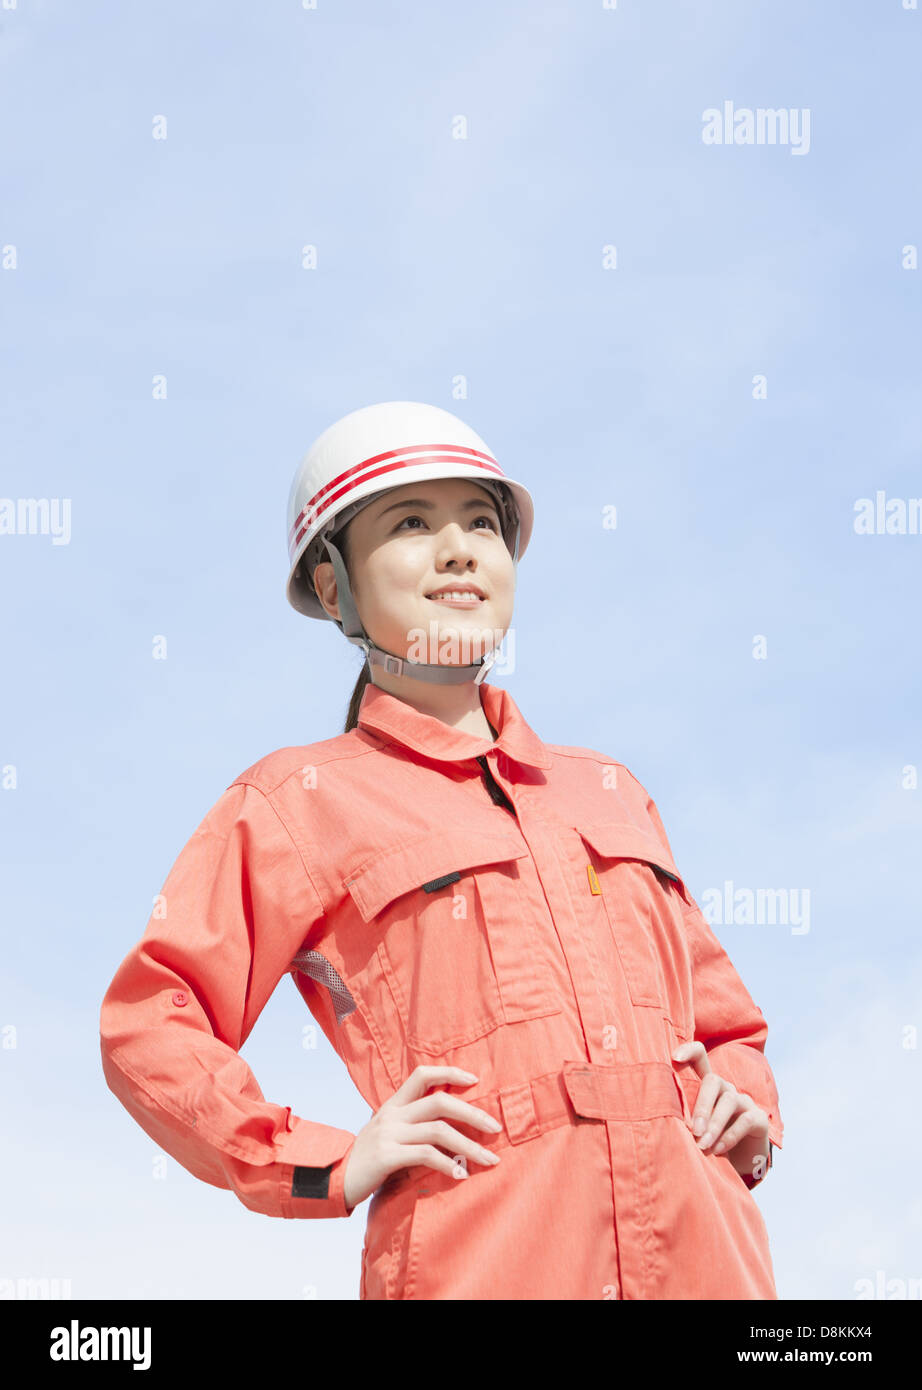 Rescue worker Stock Photo